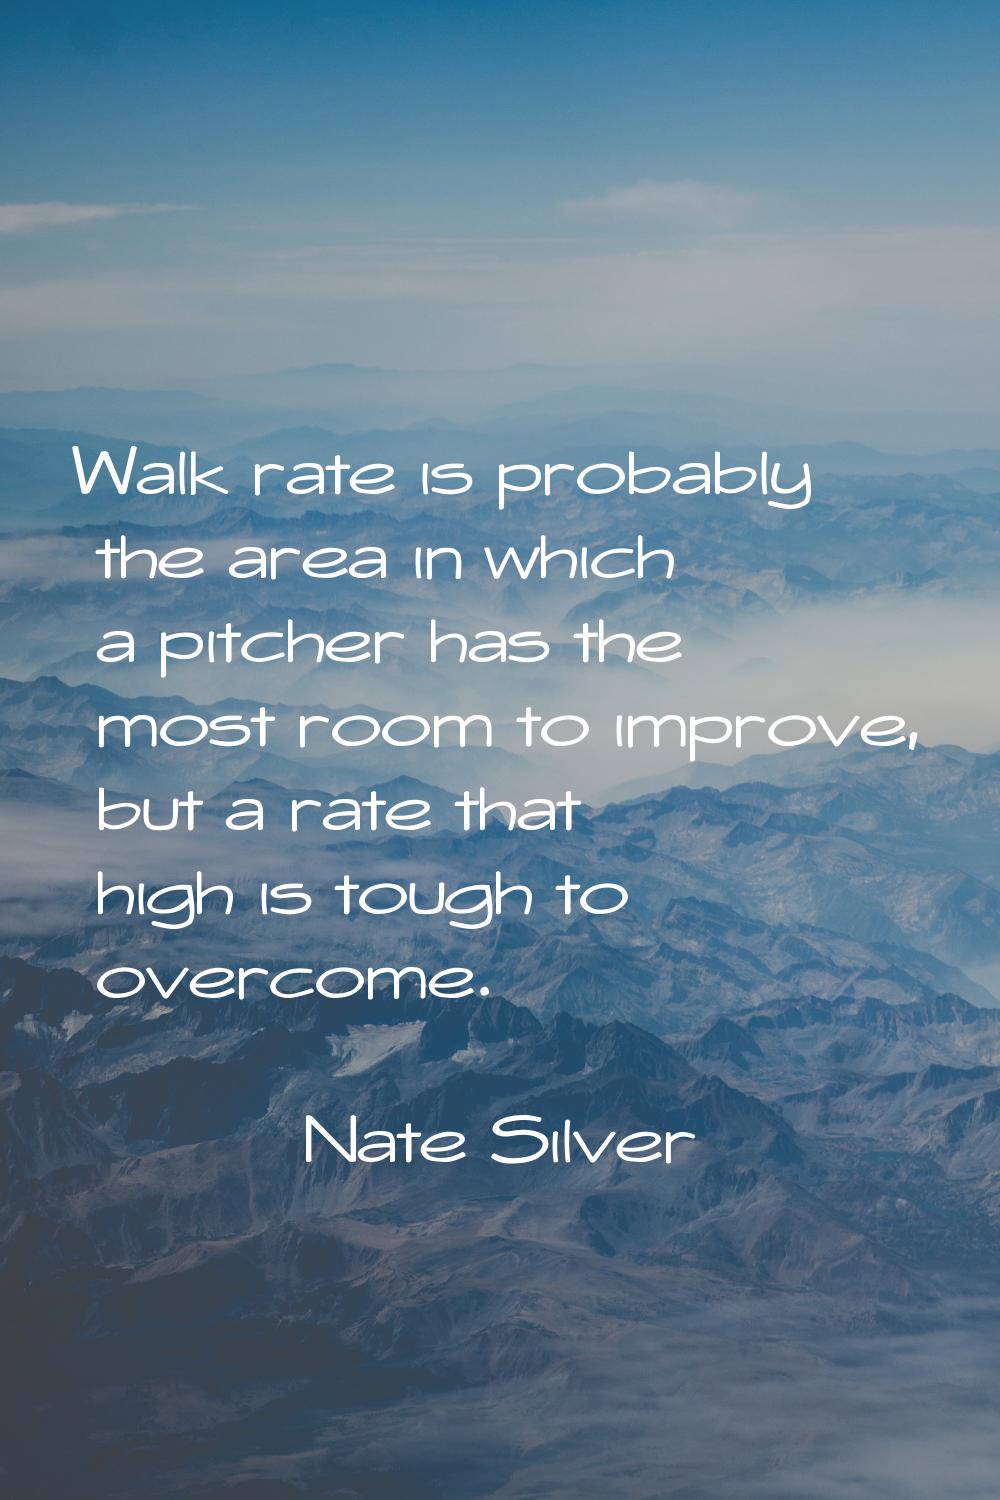 Walk rate is probably the area in which a pitcher has the most room to improve, but a rate that hig